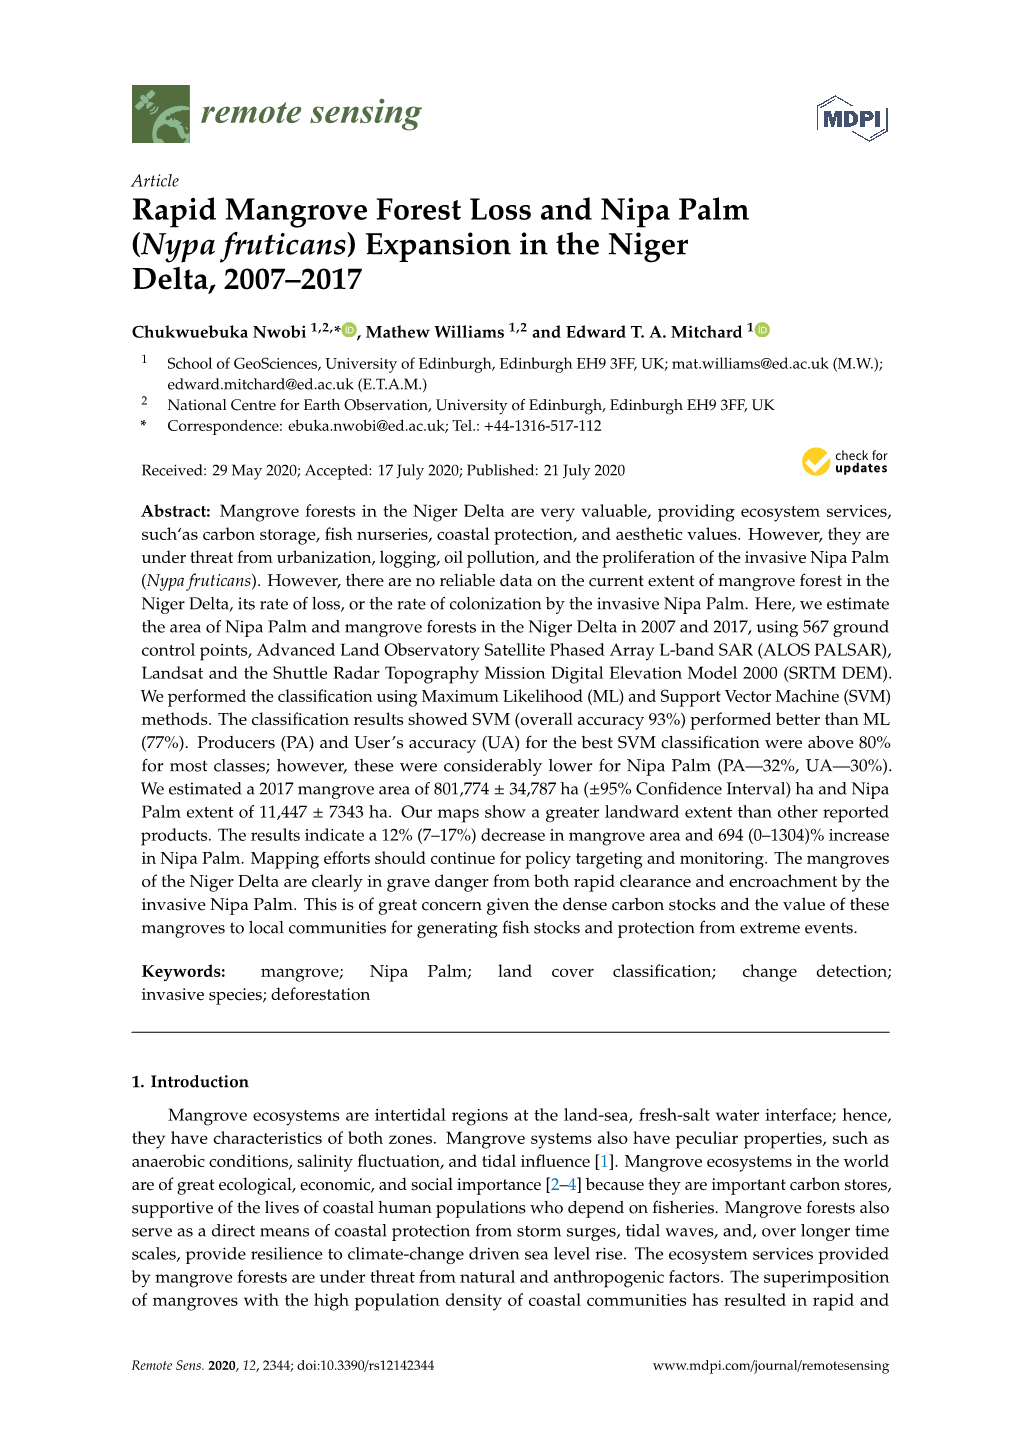 Rapid Mangrove Forest Loss and Nipa Palm (Nypa Fruticans) Expansion in the Niger Delta, 2007–2017